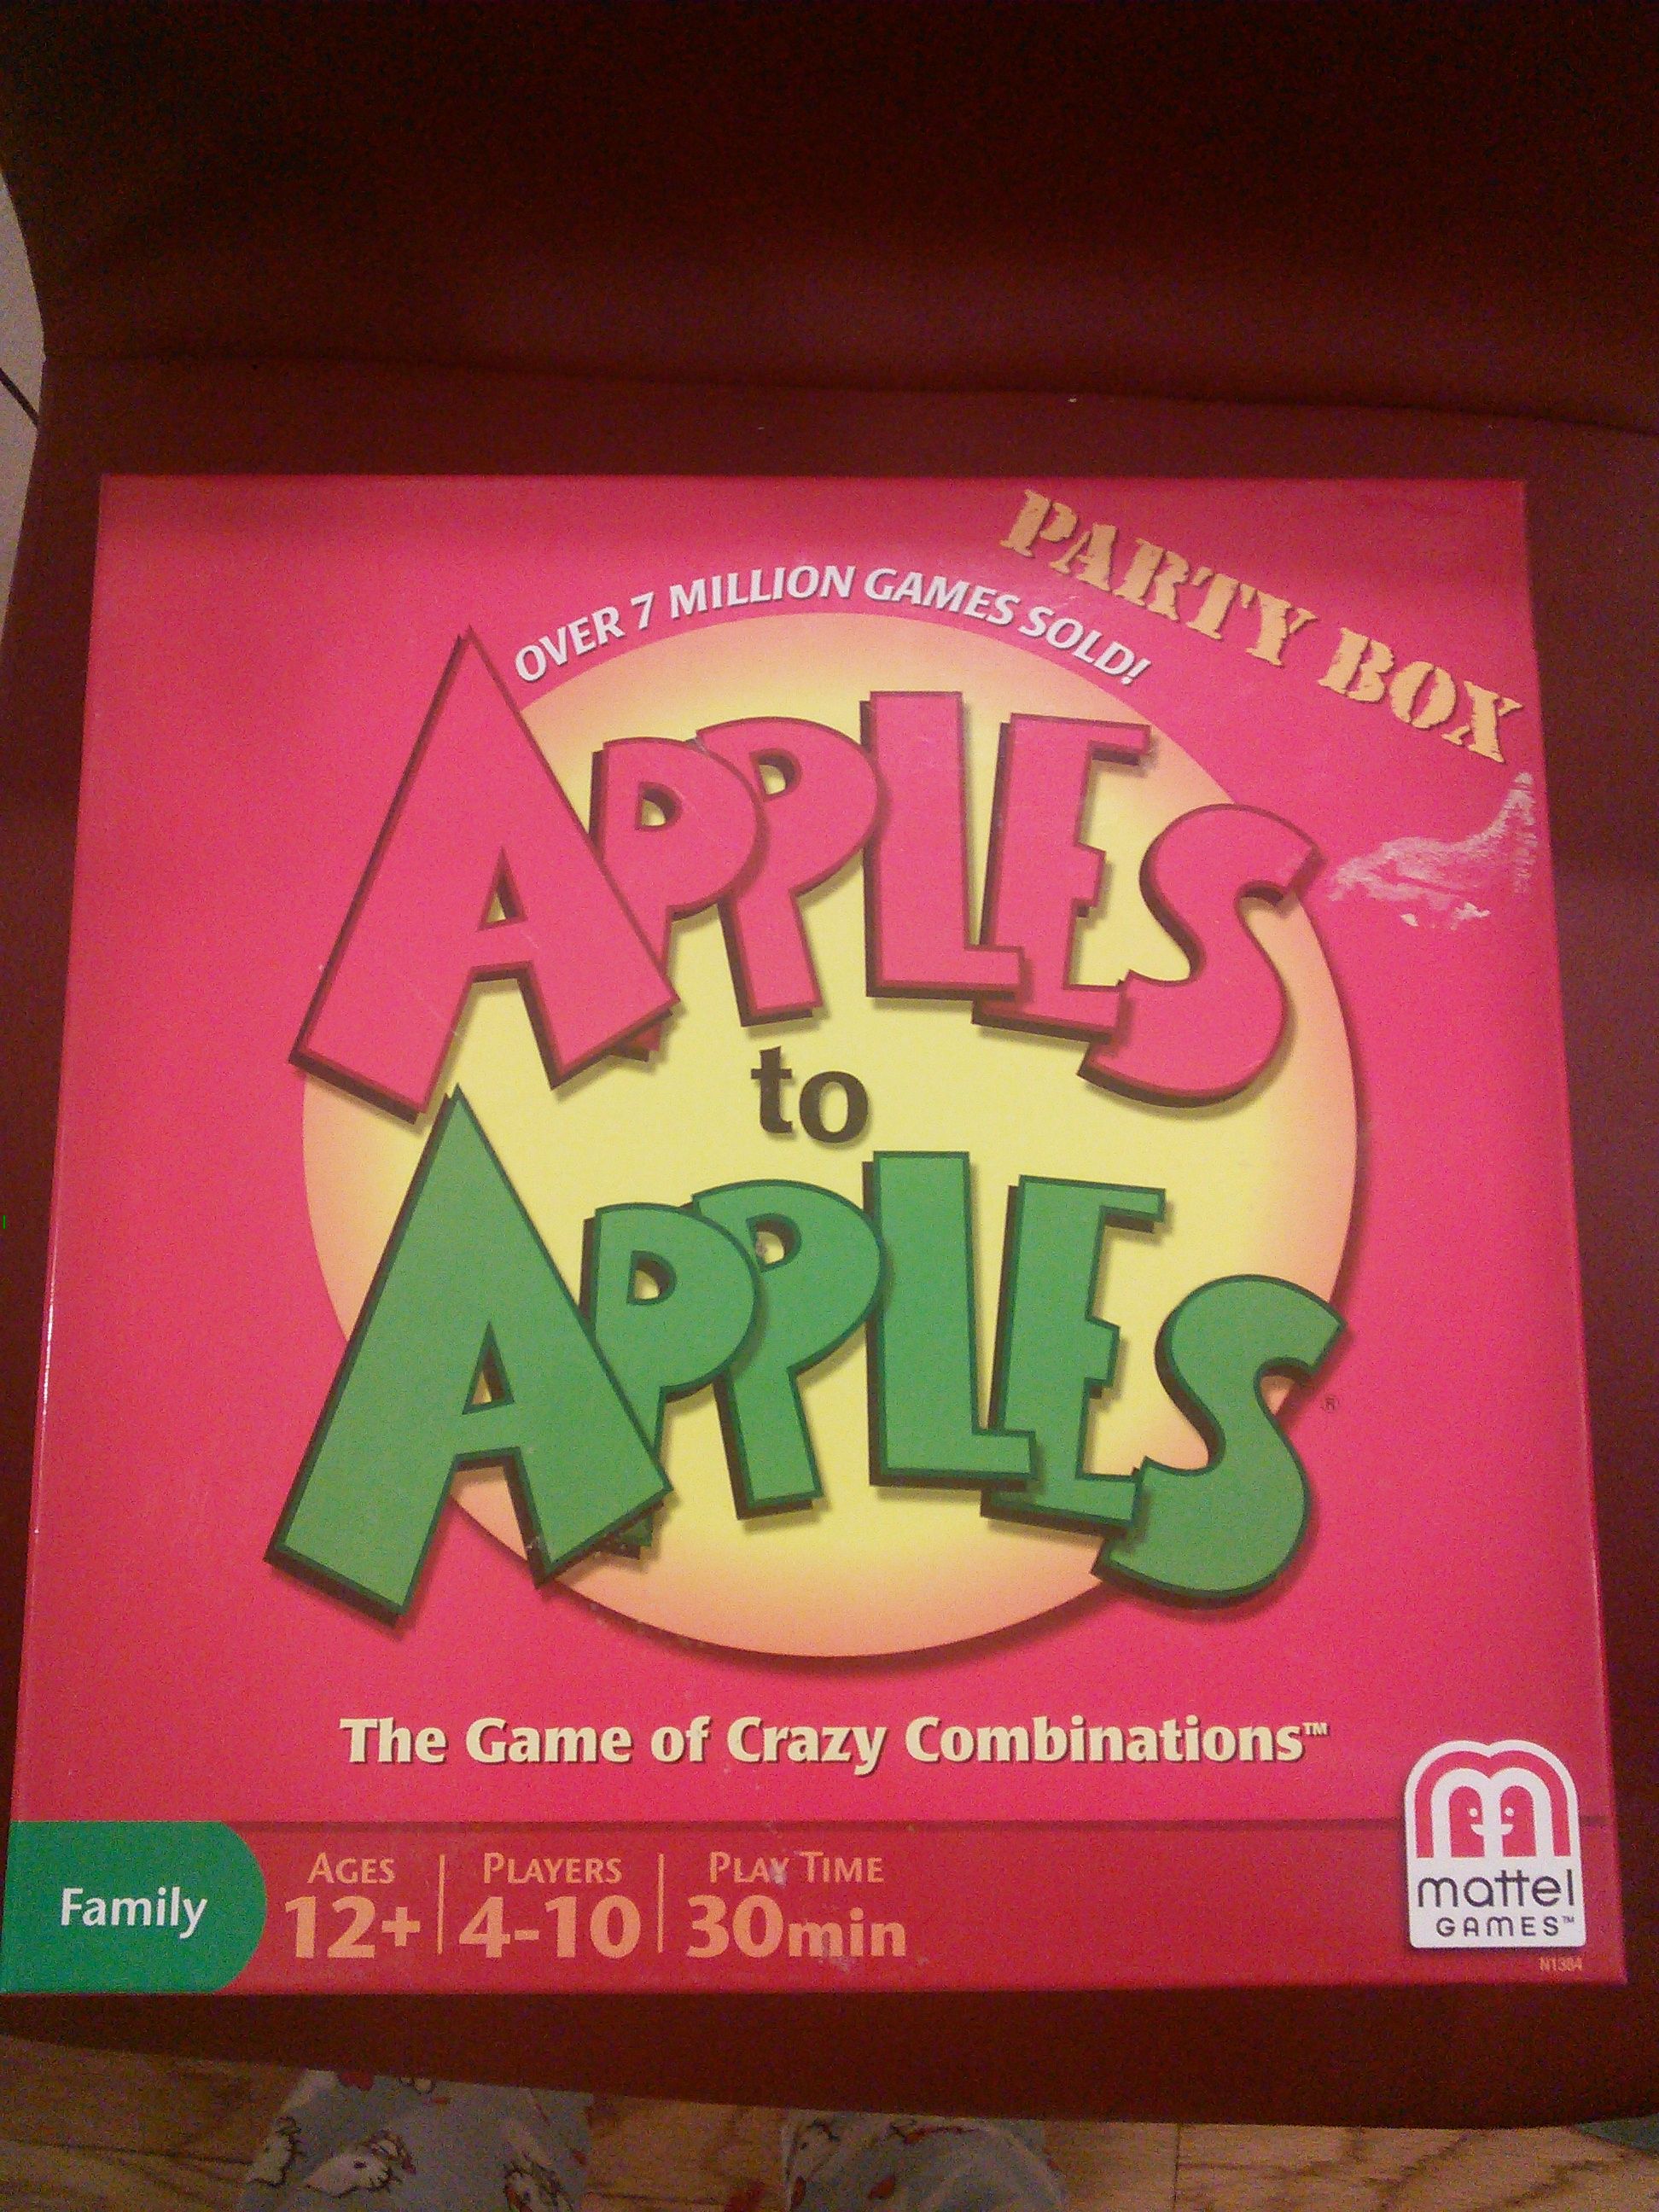 Different Card Games ( Apples to apples, sequences & puzzles)